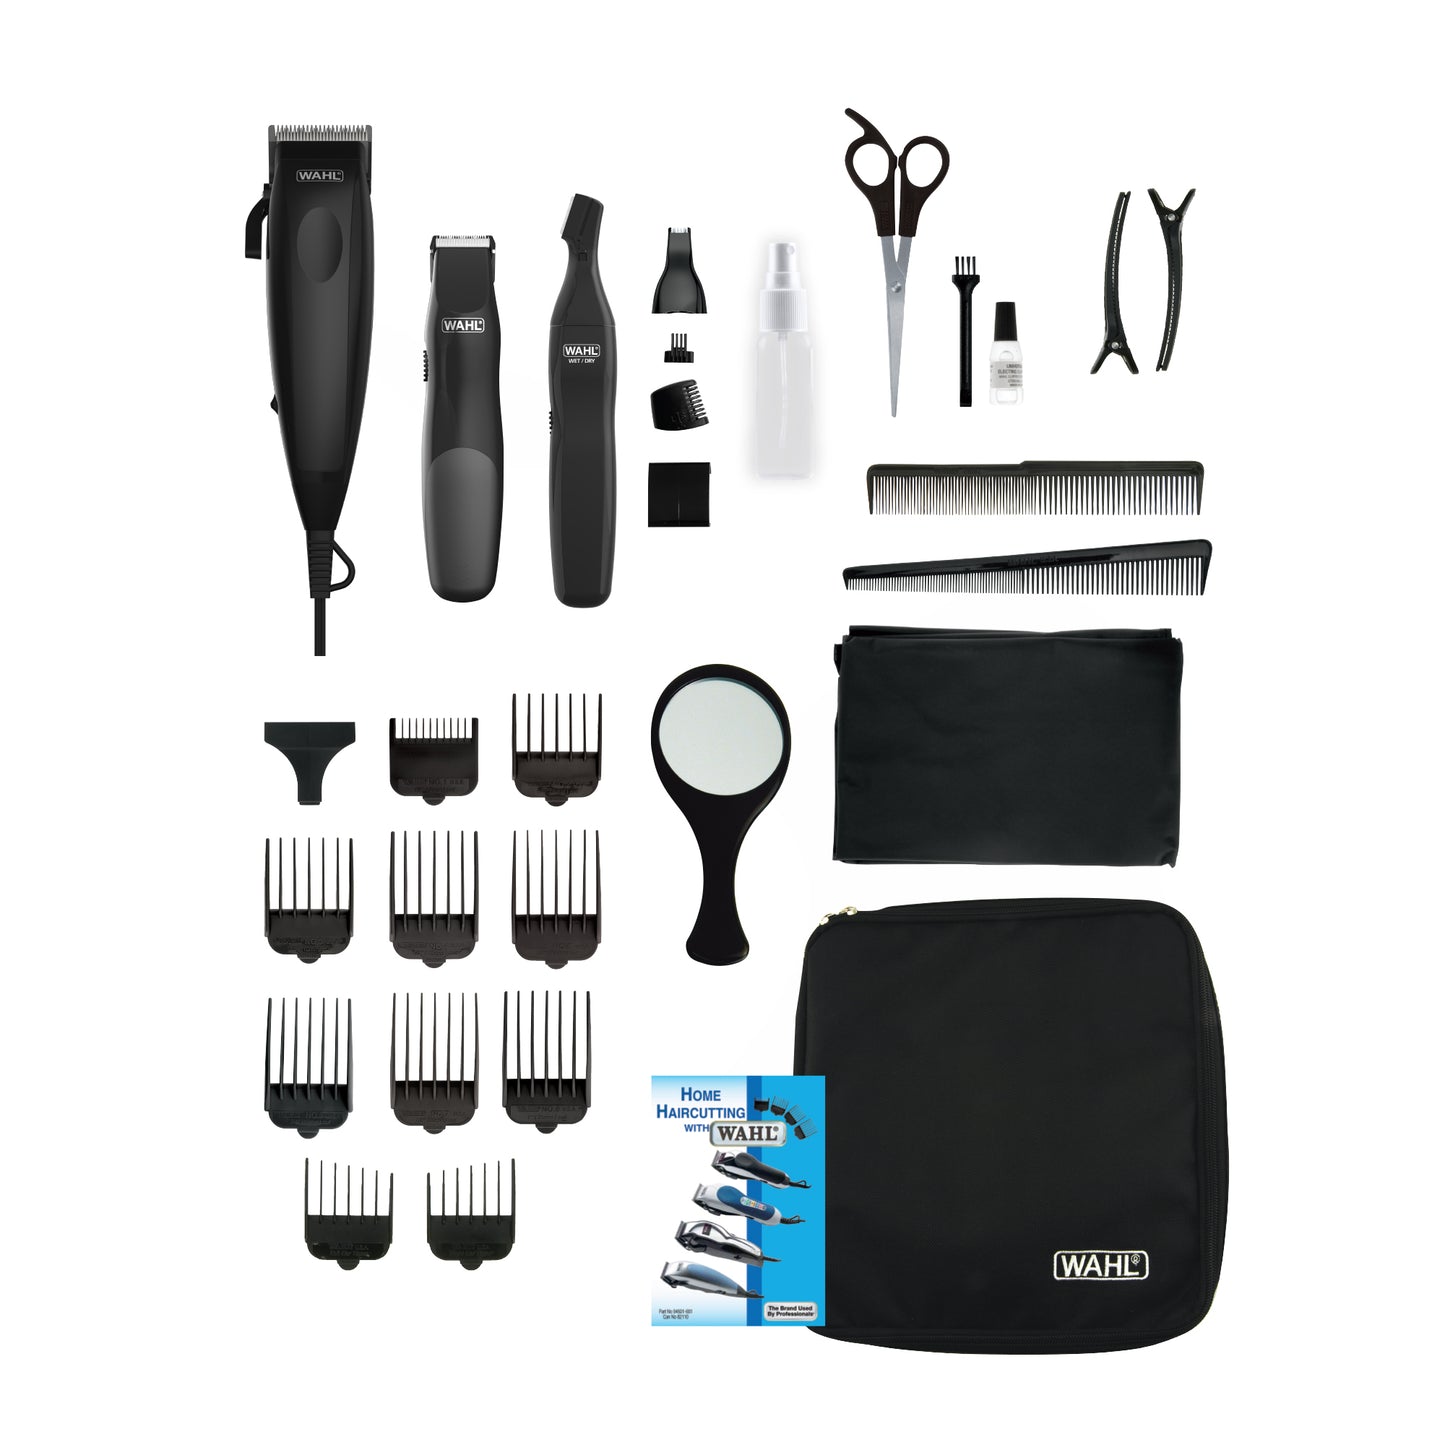 WAHL SIGNATURE SERIES HOME BARBER KIT